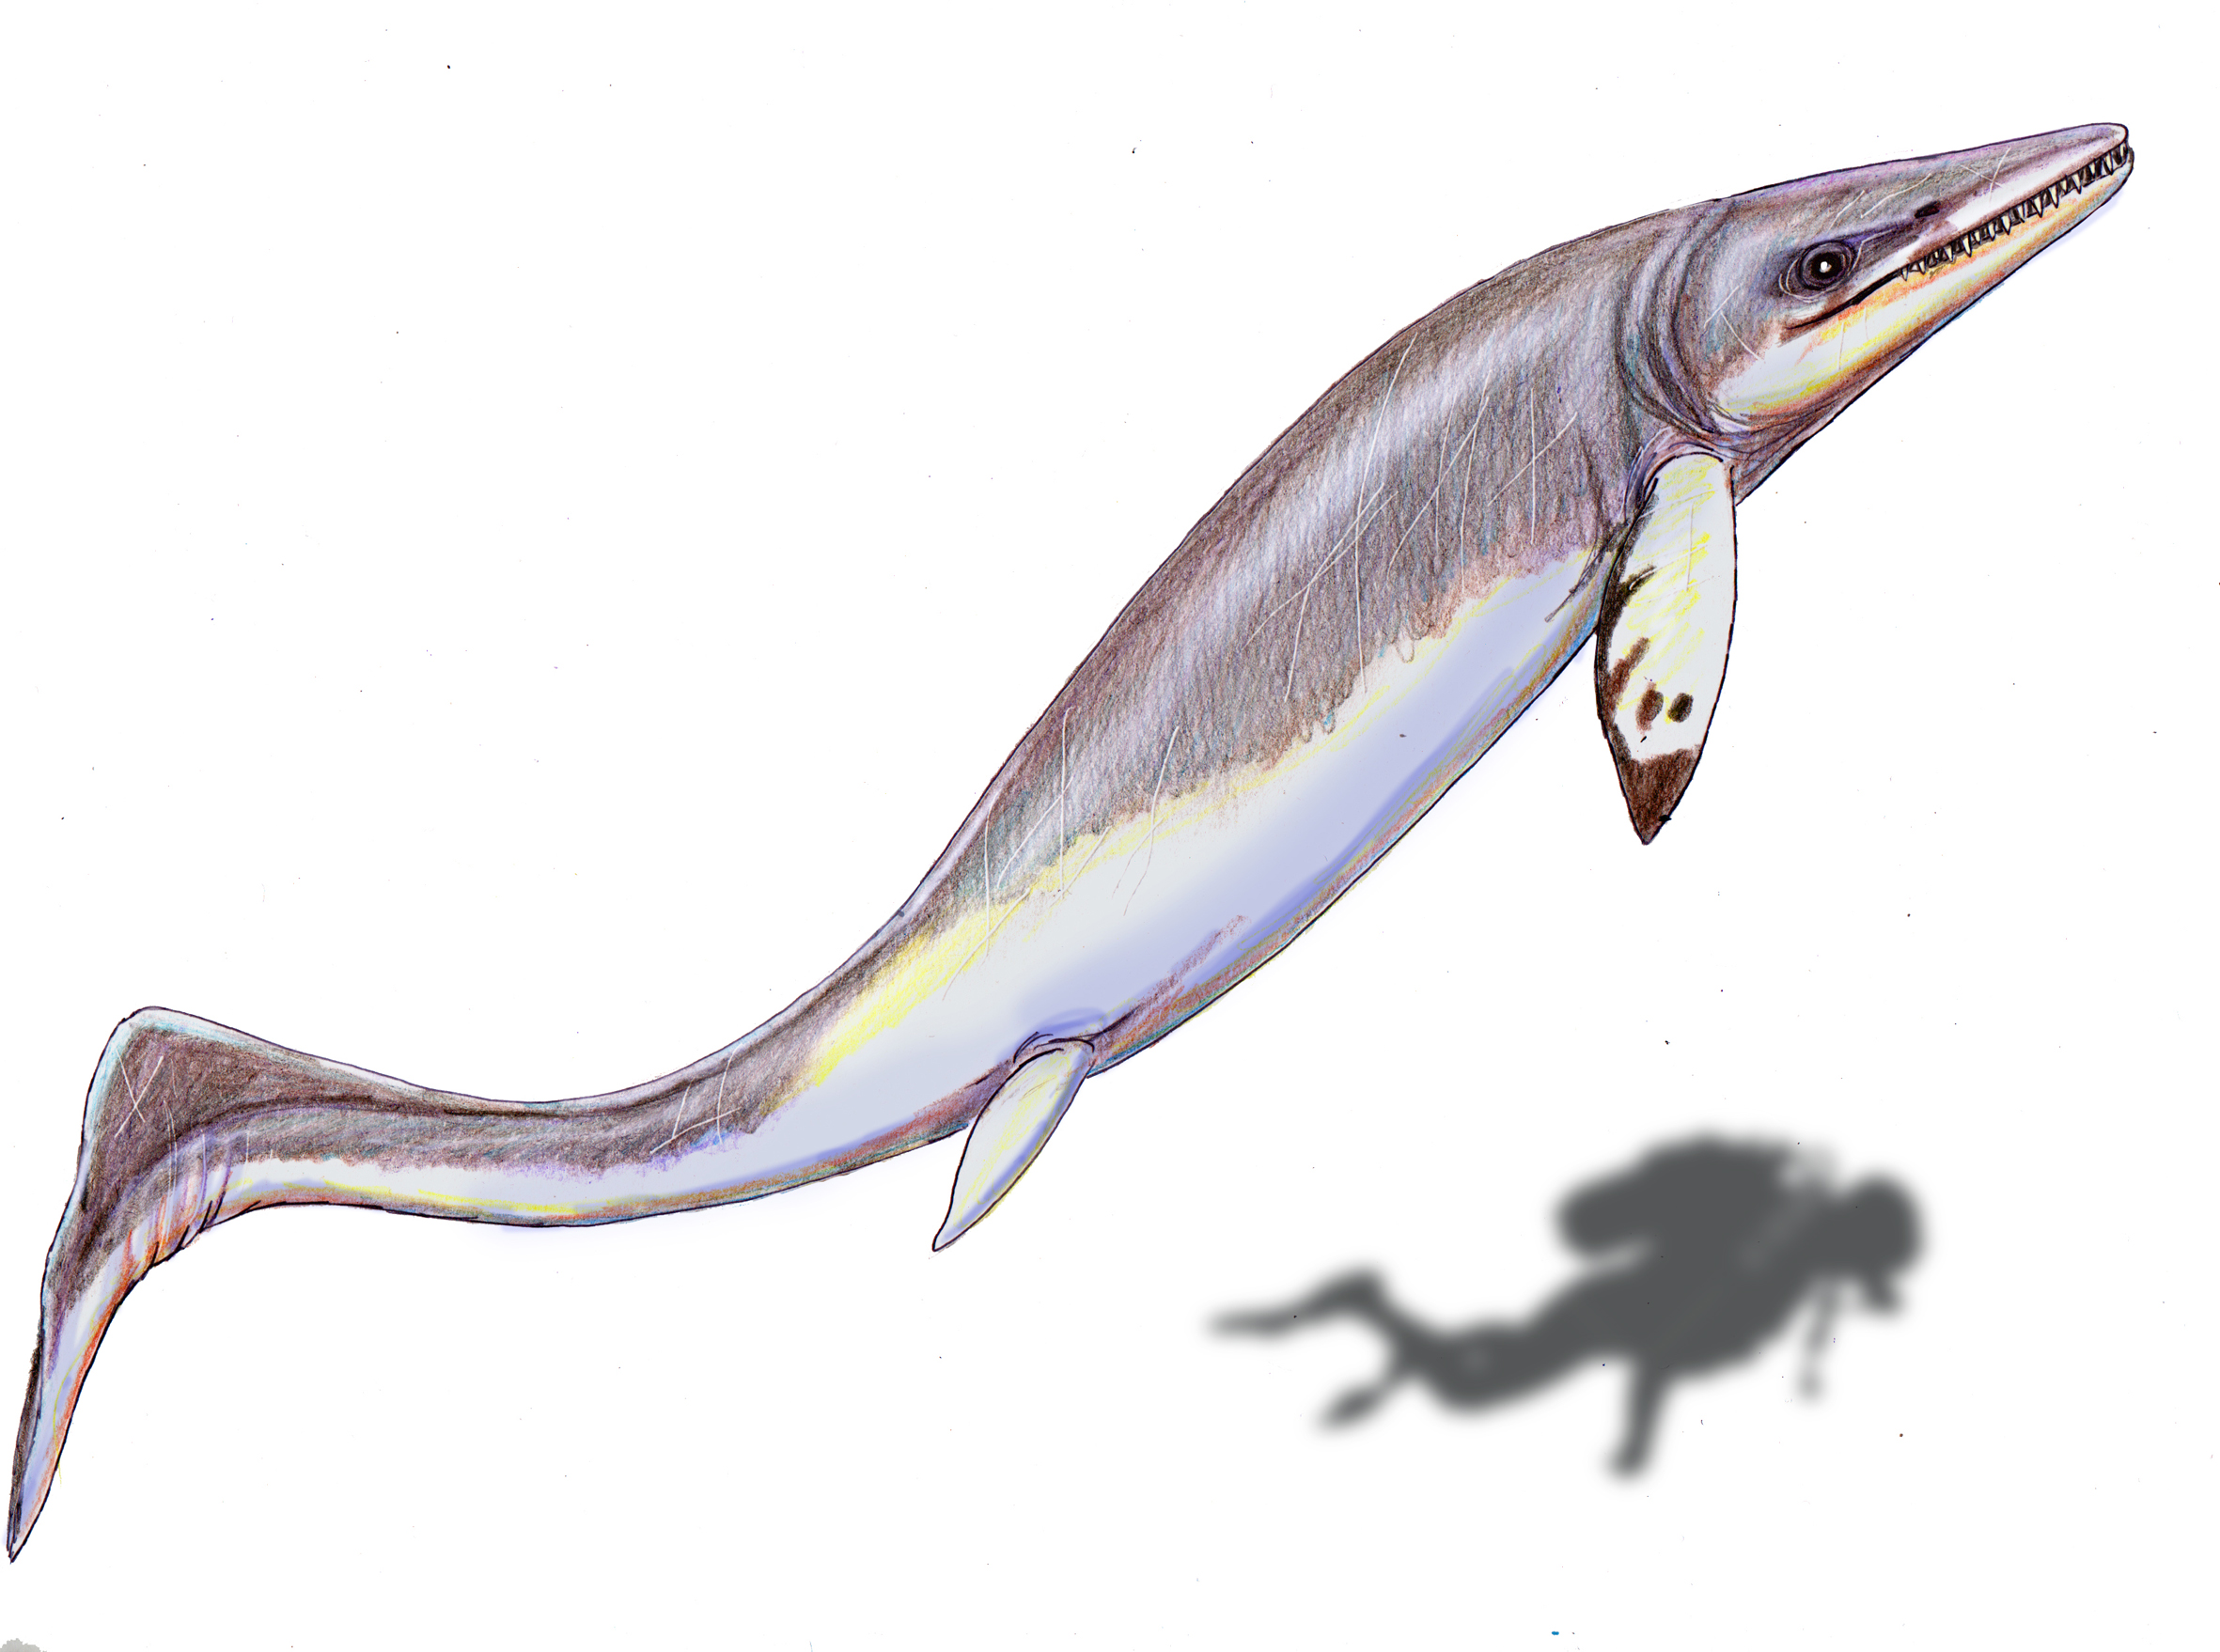 Illustration of a Thalattoarchon compared to a diver © Wikimedia Commons